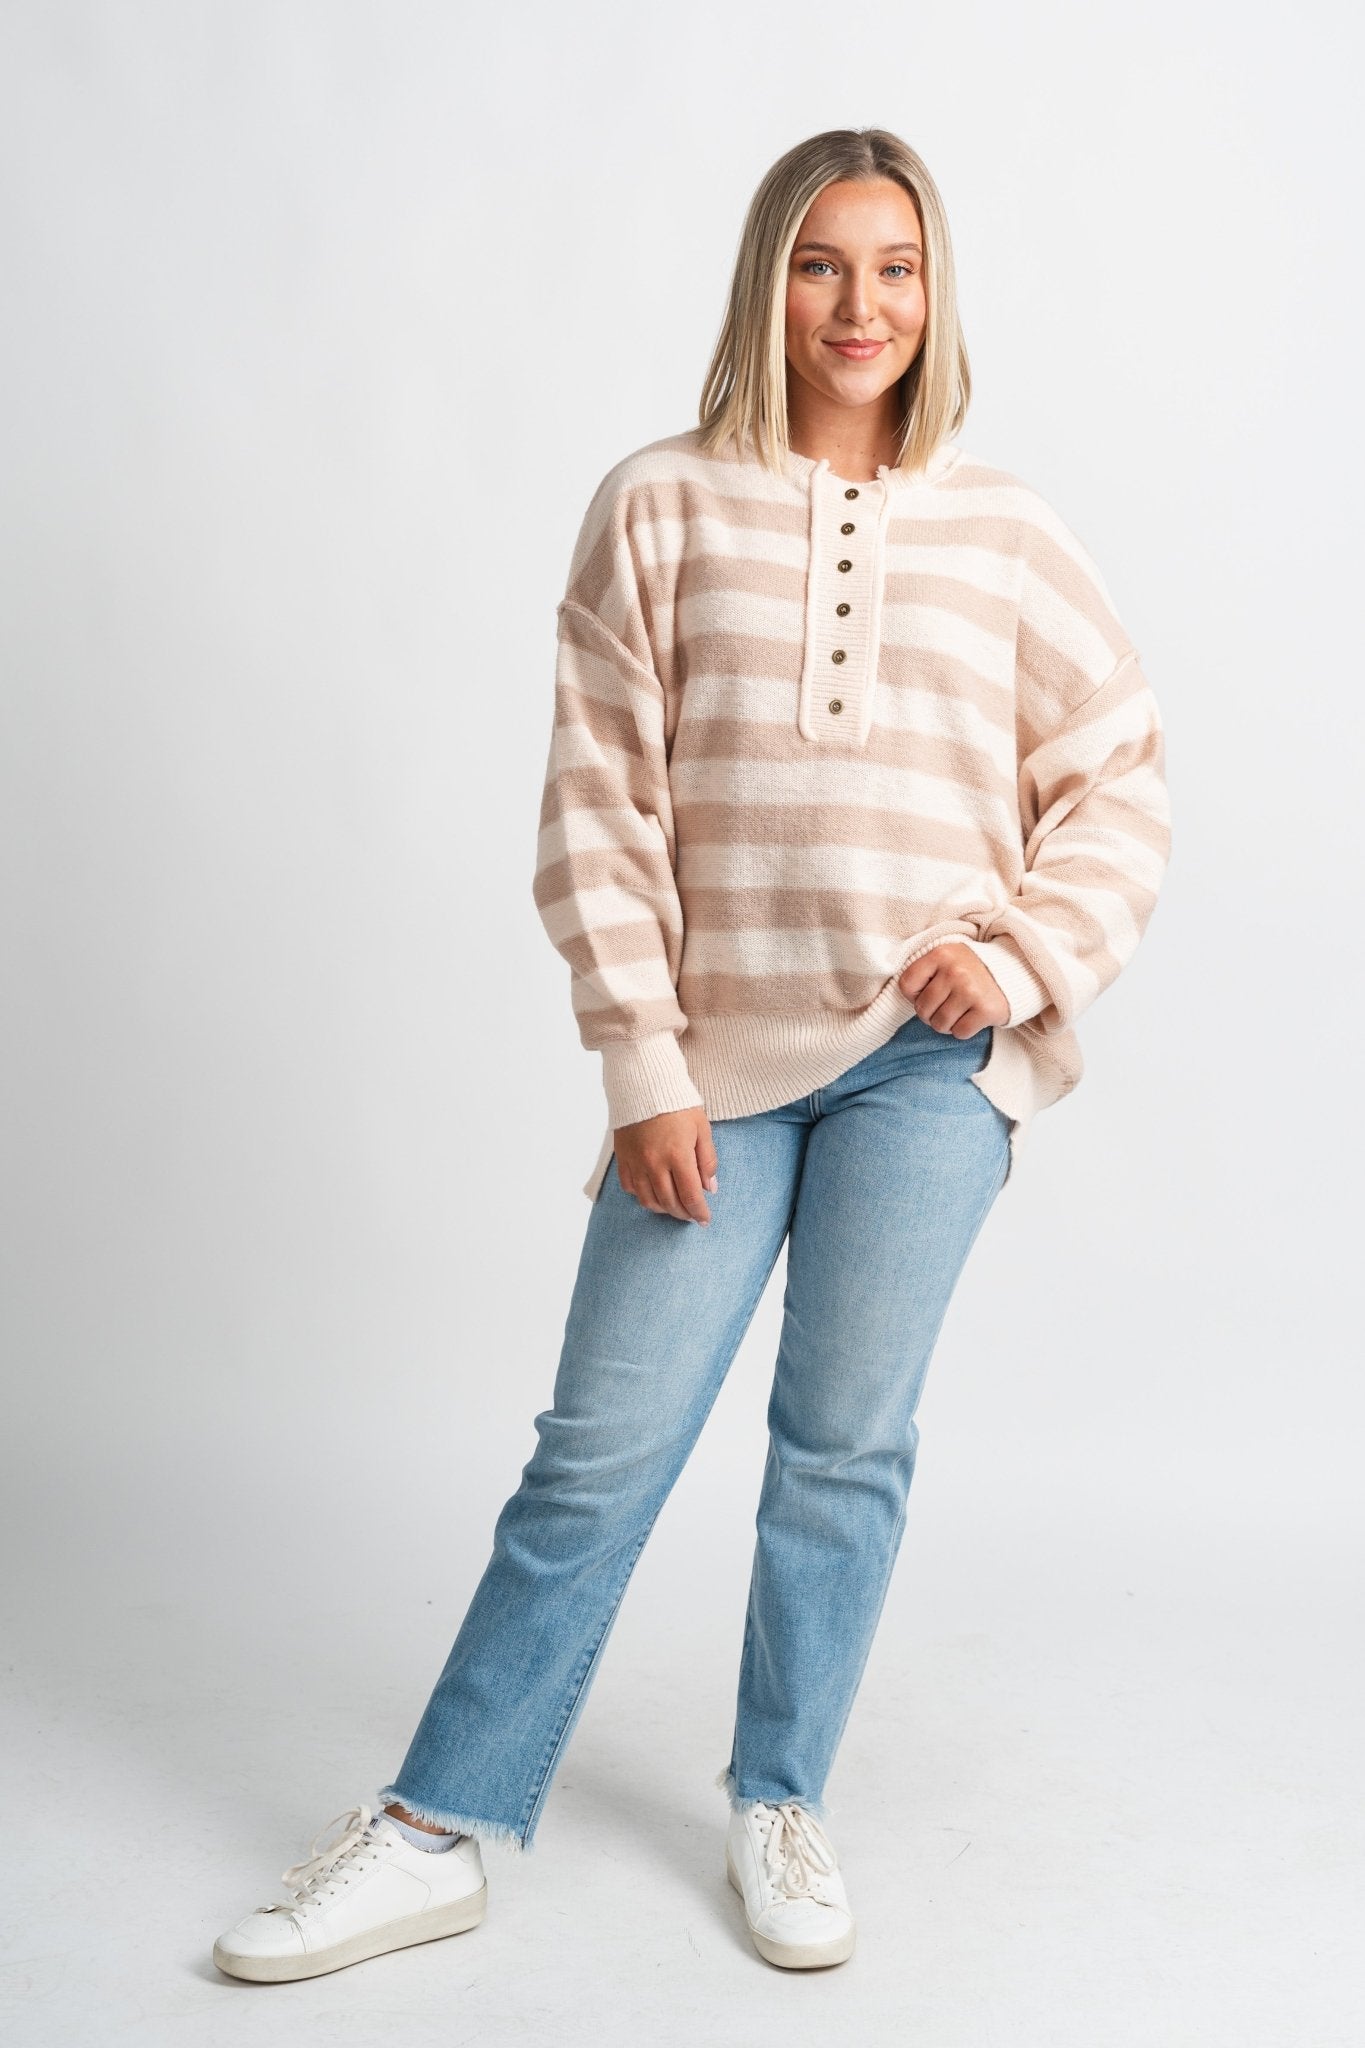 Oversized striped sweater natural/taupe - Trendy Sweaters | Cute Pullover Sweaters at Lush Fashion Lounge Boutique in Oklahoma City